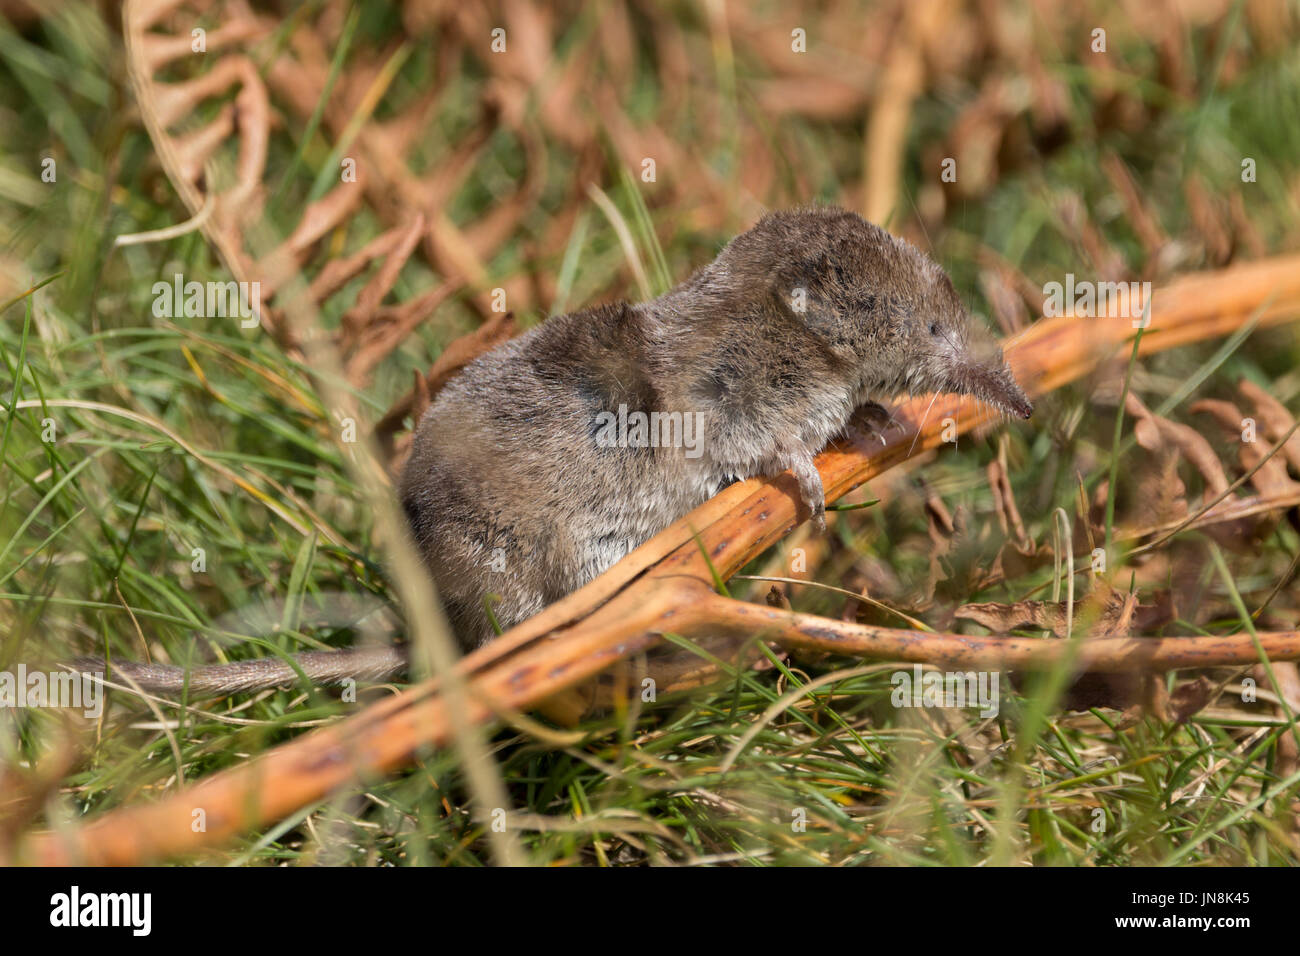 A shrew or Sorex araneus propped up on bracken at an area in Surrey hills UK. It had very recently died as warm and soft maybe dropped by a predator. Stock Photo